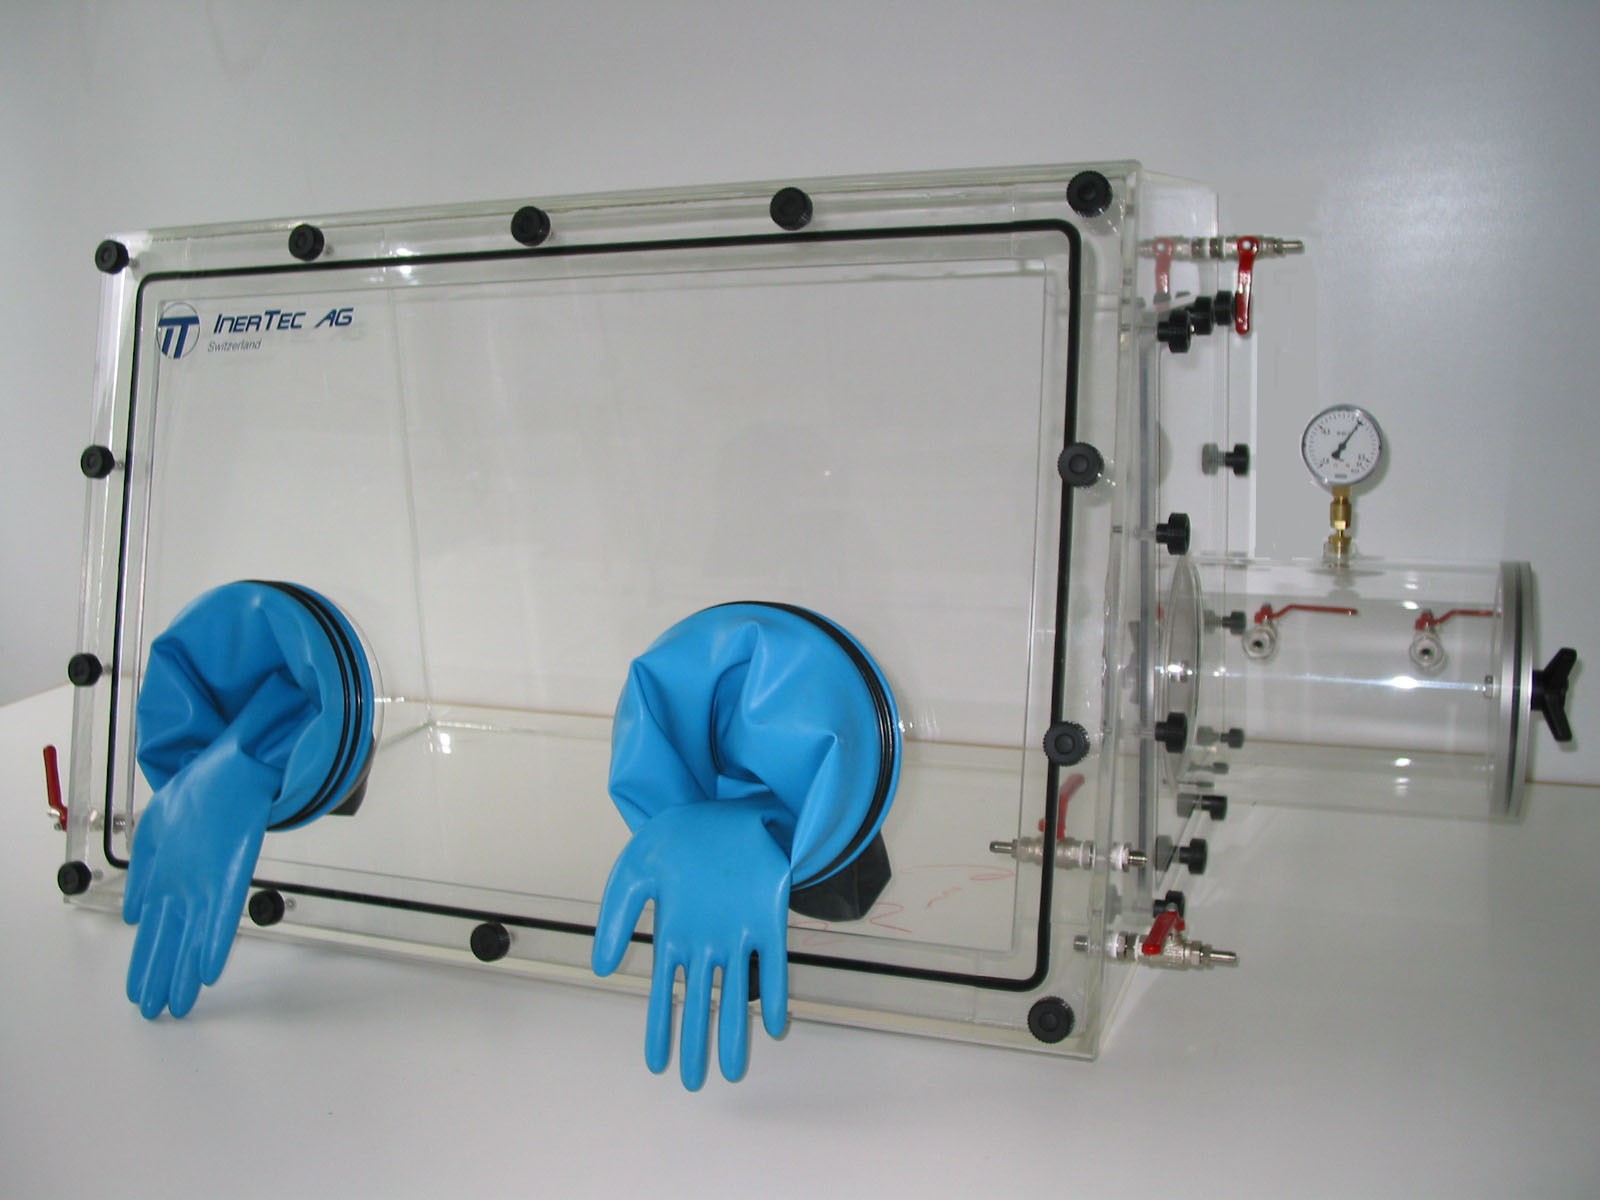 Glovebox made of acrylic&gt; Gas filling: by hand, front design: swivels upwards, side design: removable flange Control: oxygen display